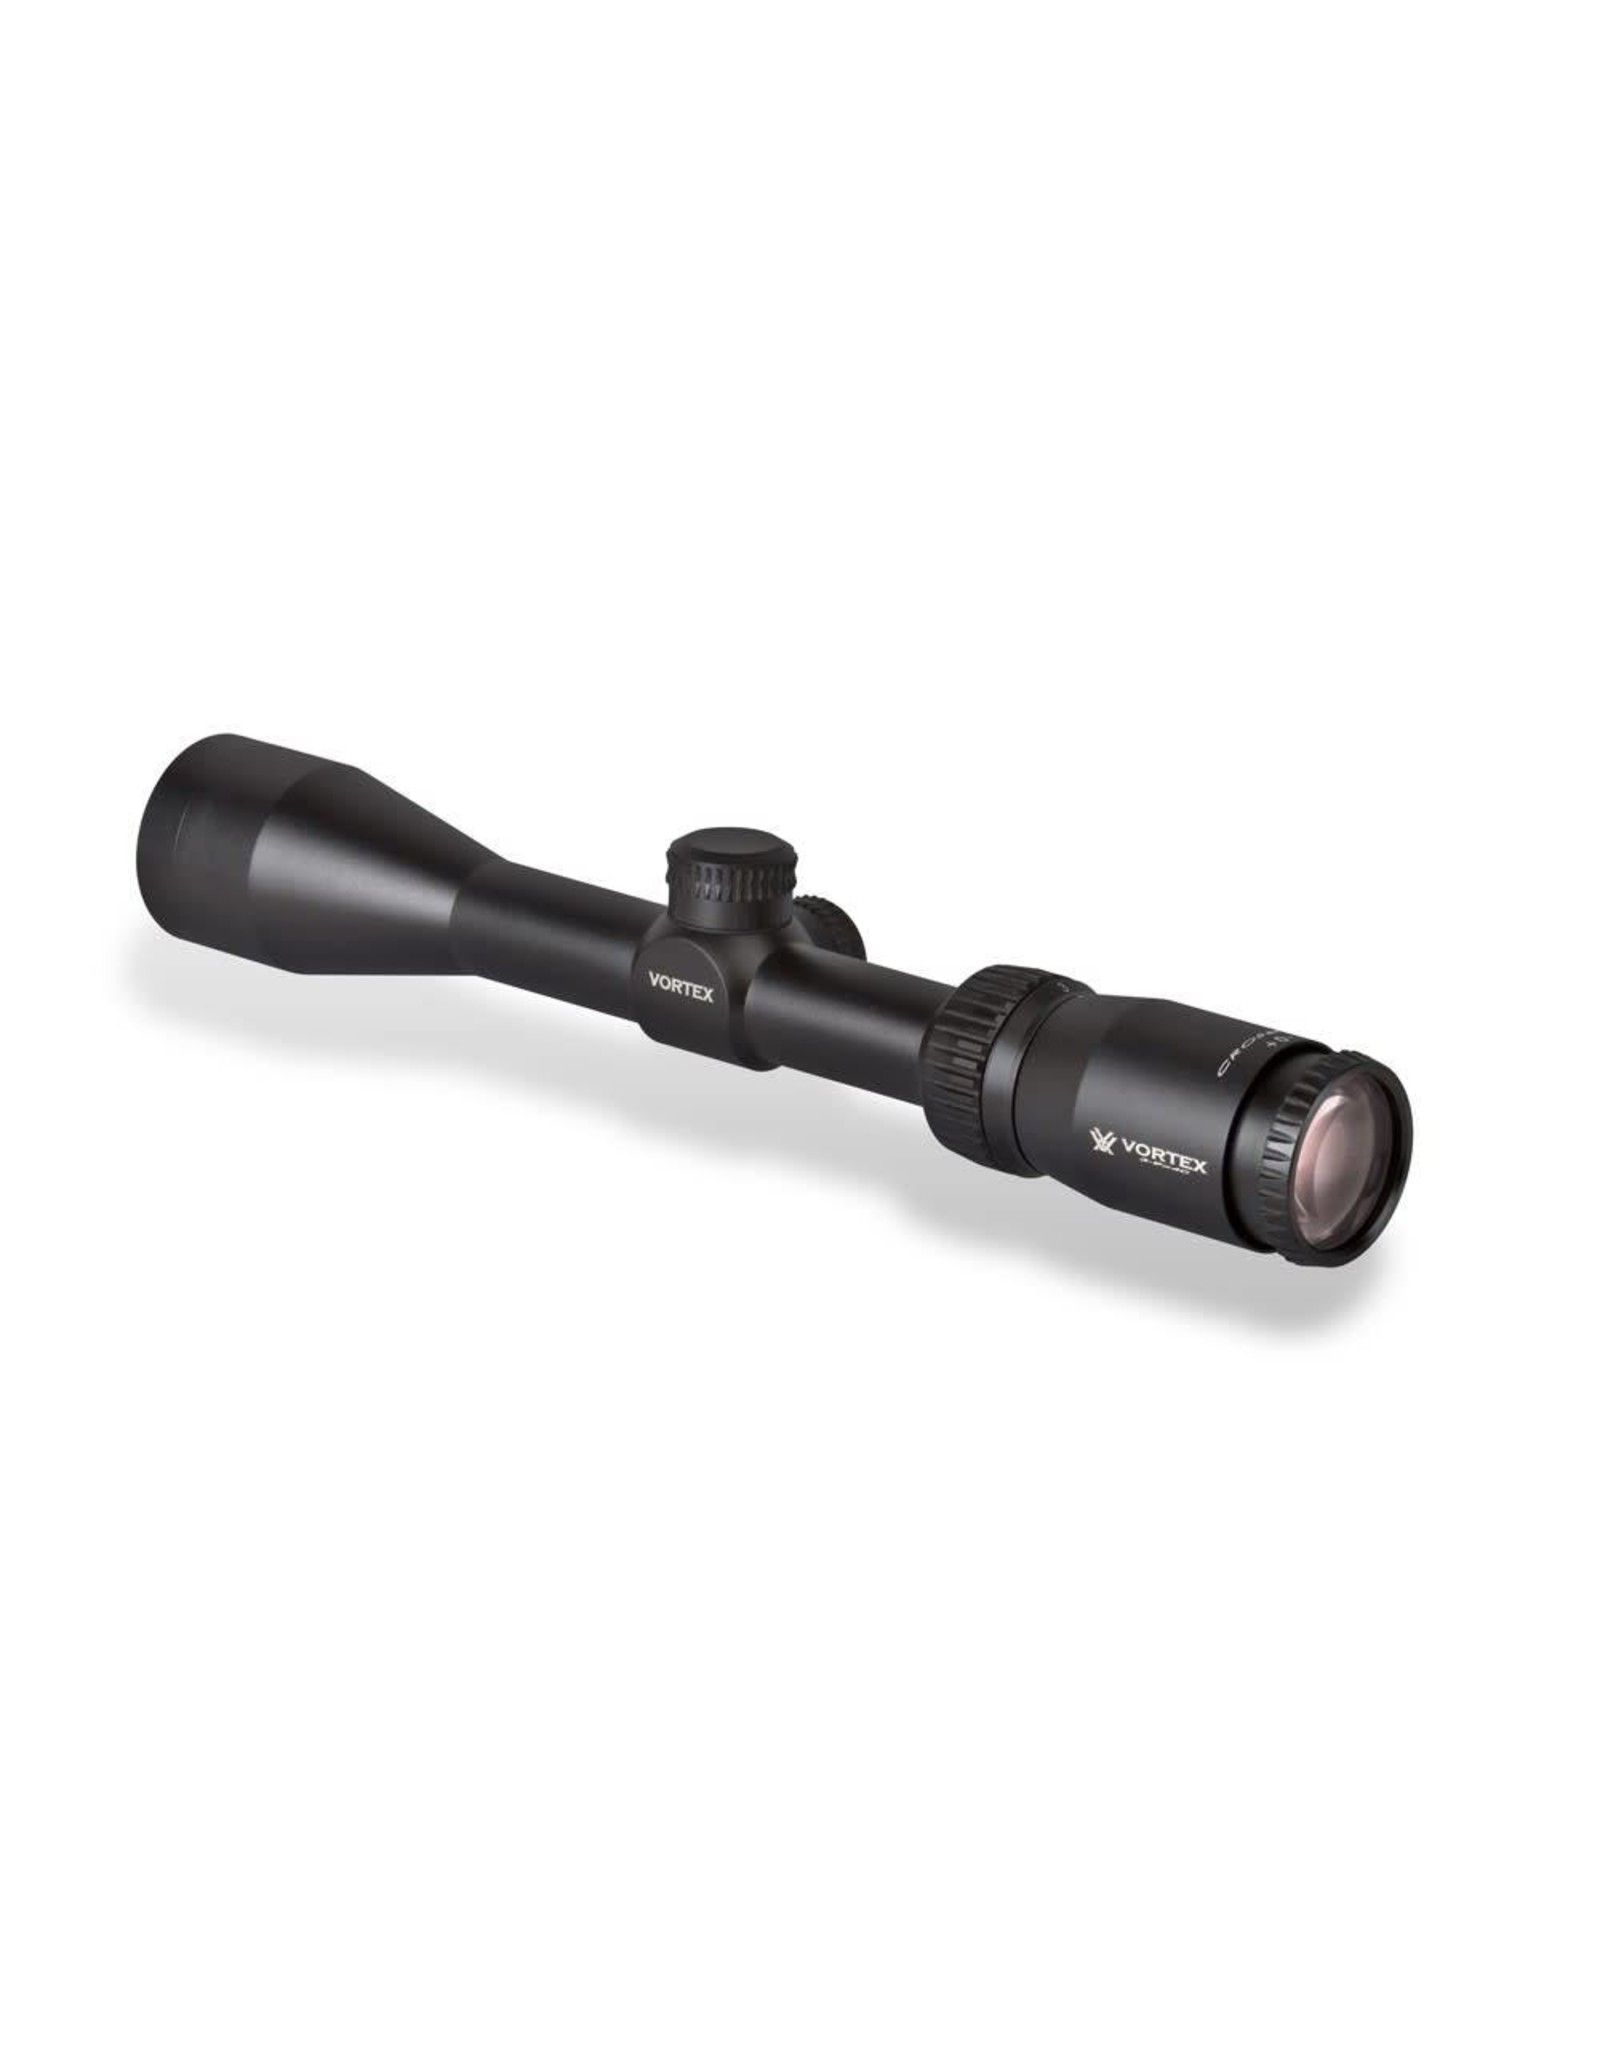 Vortex Crossfire Ii 3 9x40mm Riflescope With Dead Hold Bdc Reticle Moa